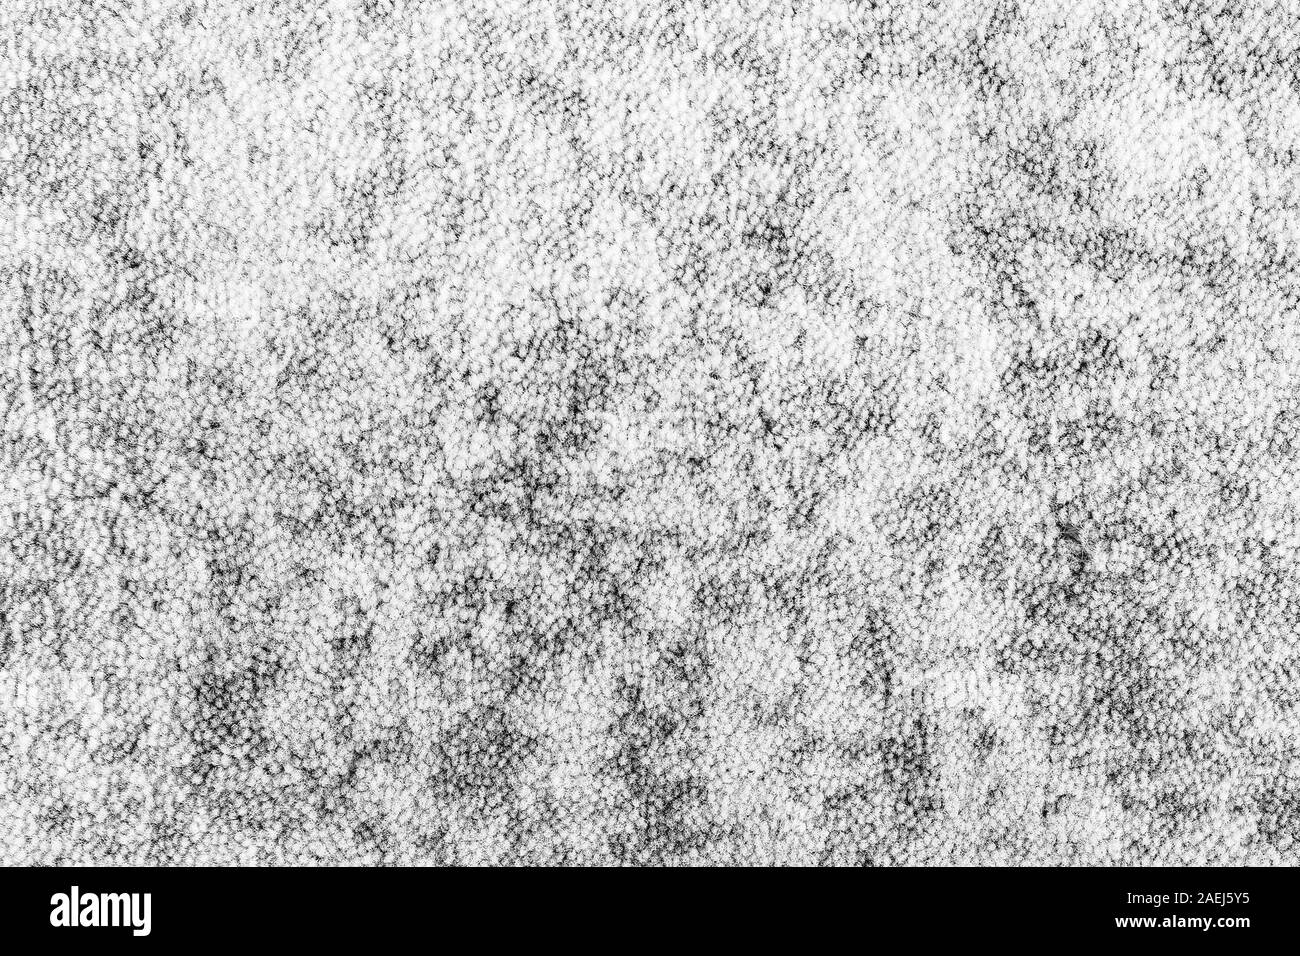 Carpet texture Black and White Stock Photos & Images - Alamy